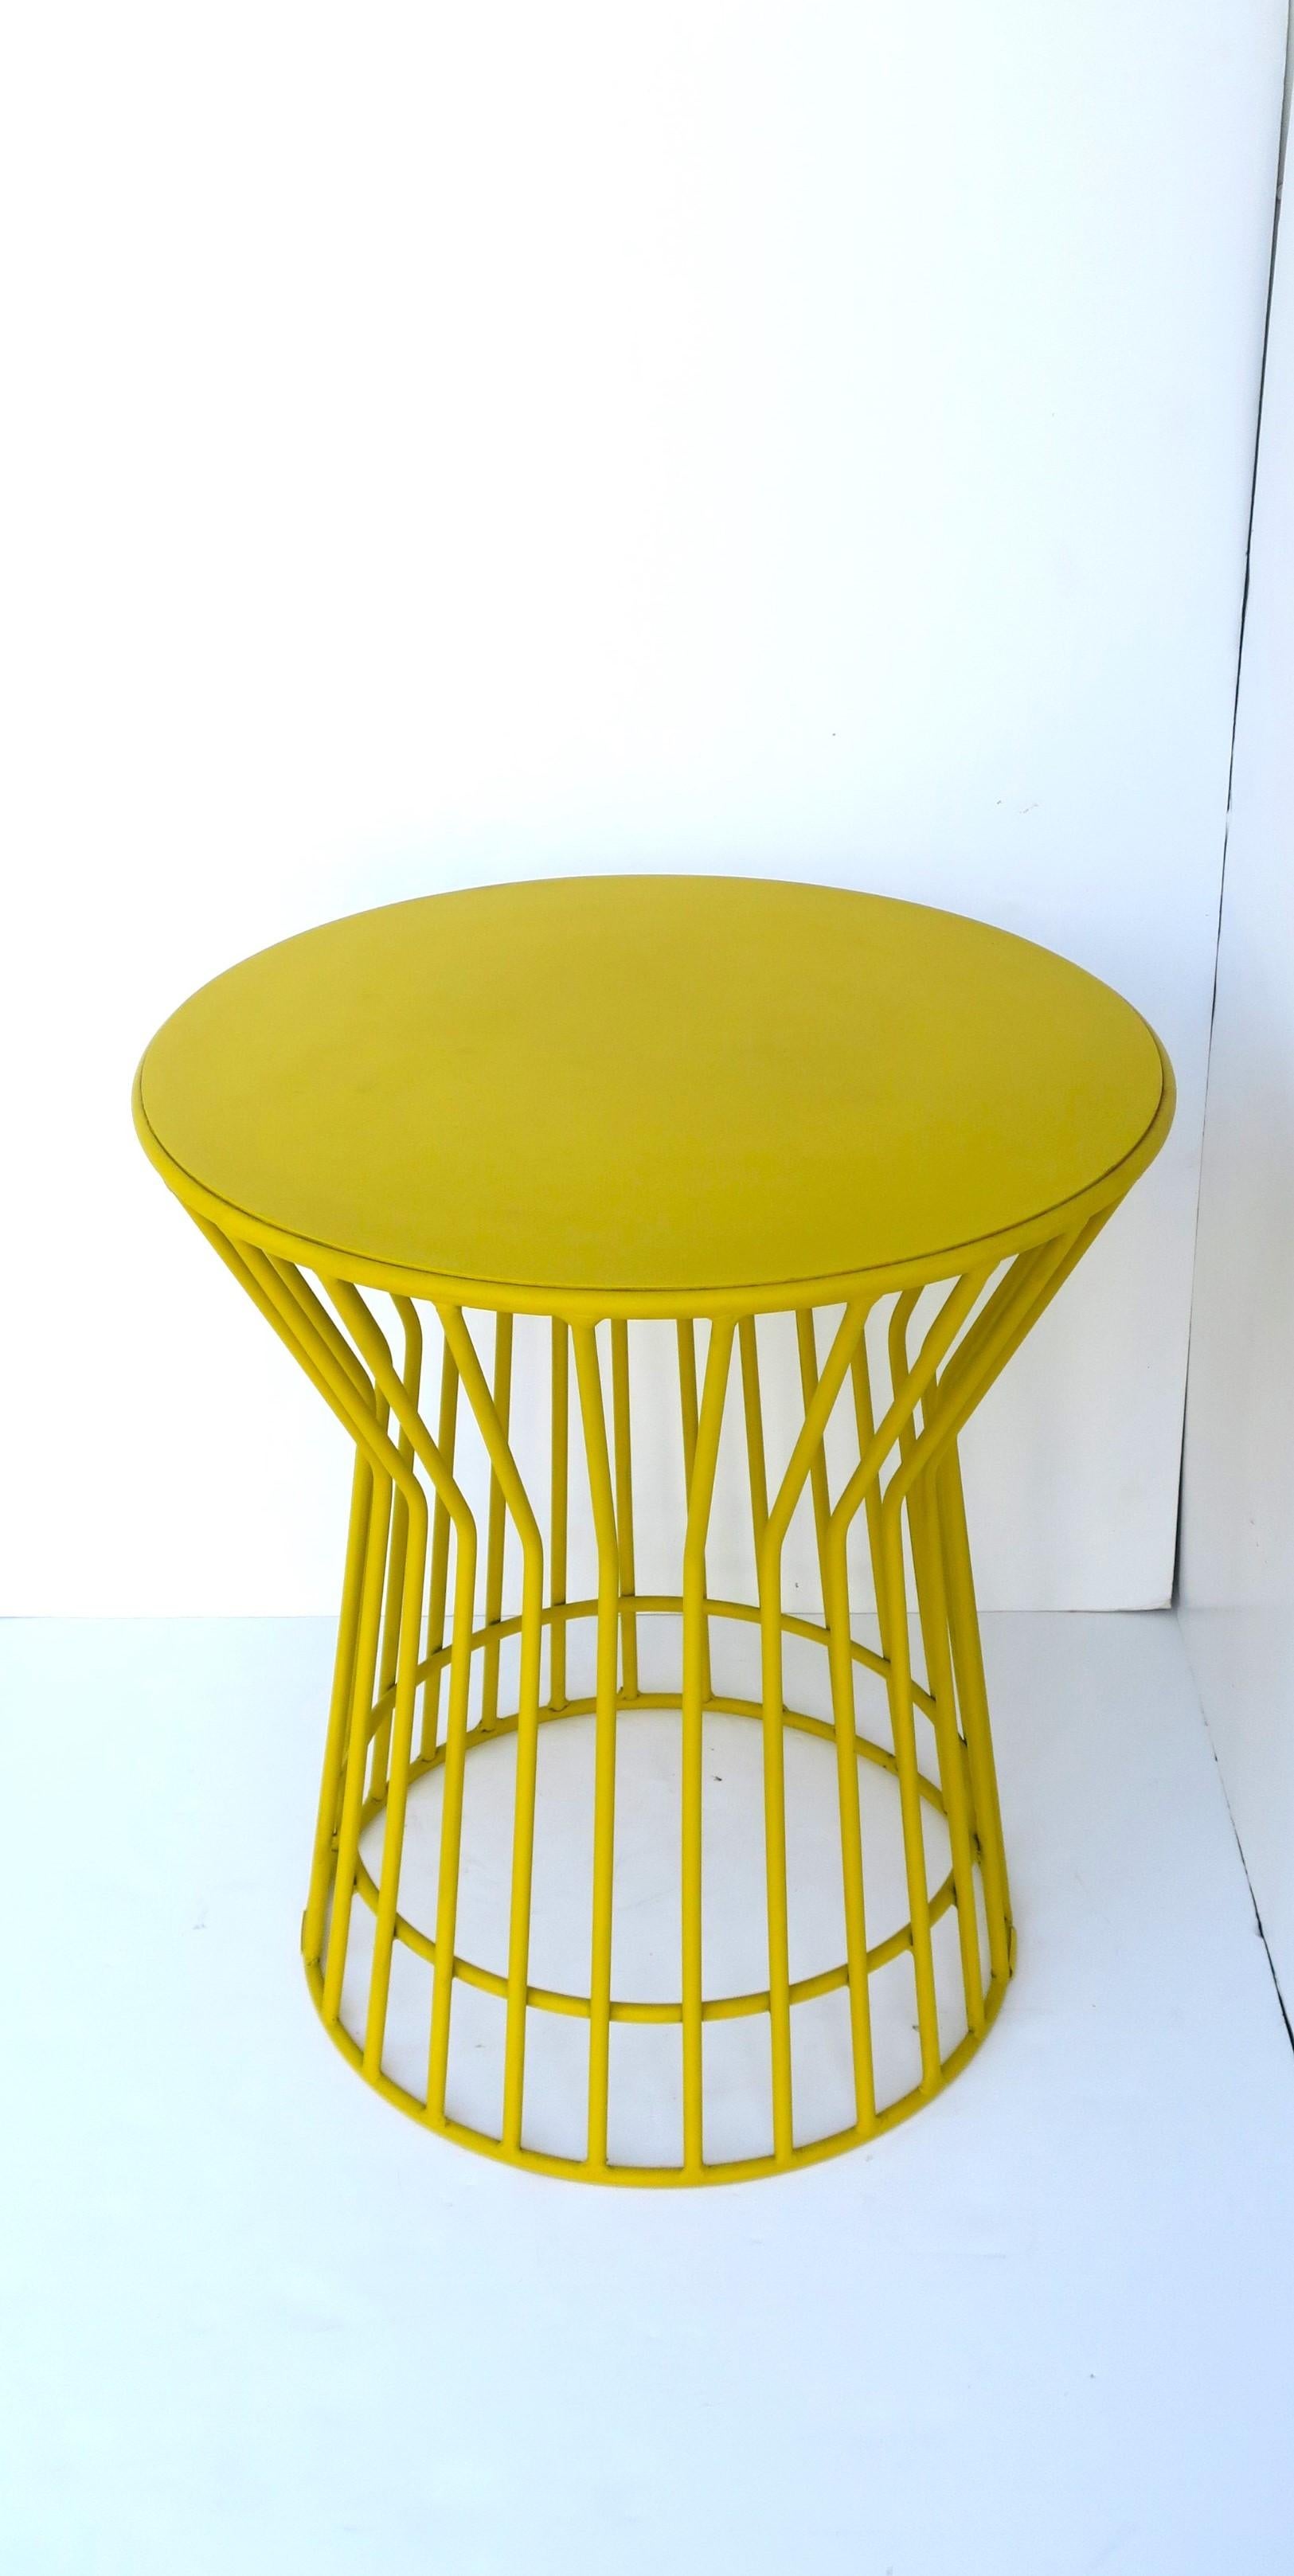 A round yellow powder-coated metal end or side table with hourglass design, in the Midcentury Modern or Postmodern design style, with a Warren Platner design influence. circa late-20th century to early 21st century. Dimensions: 20